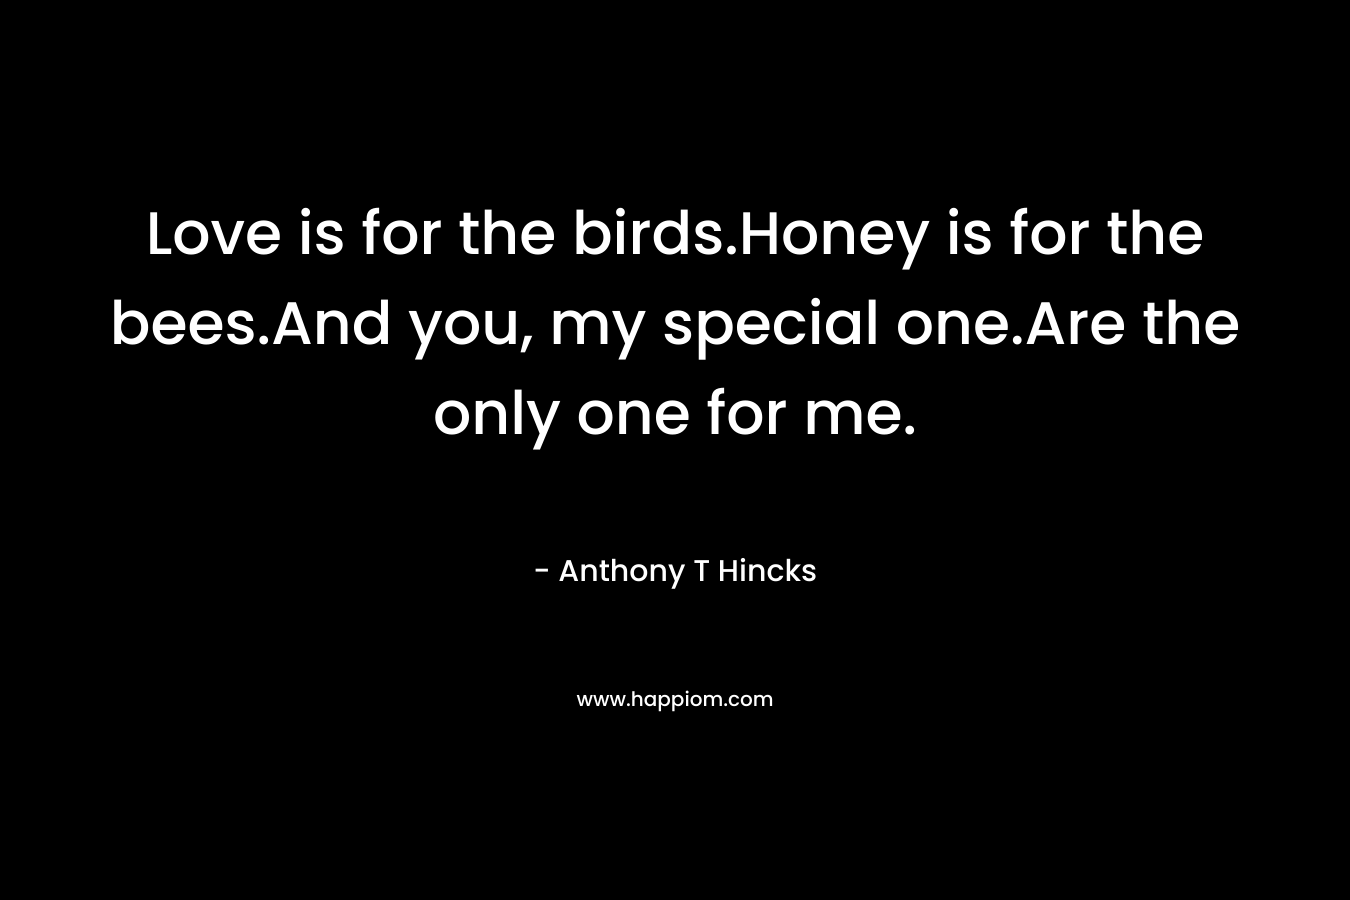 Love is for the birds.Honey is for the bees.And you, my special one.Are the only one for me. – Anthony T Hincks